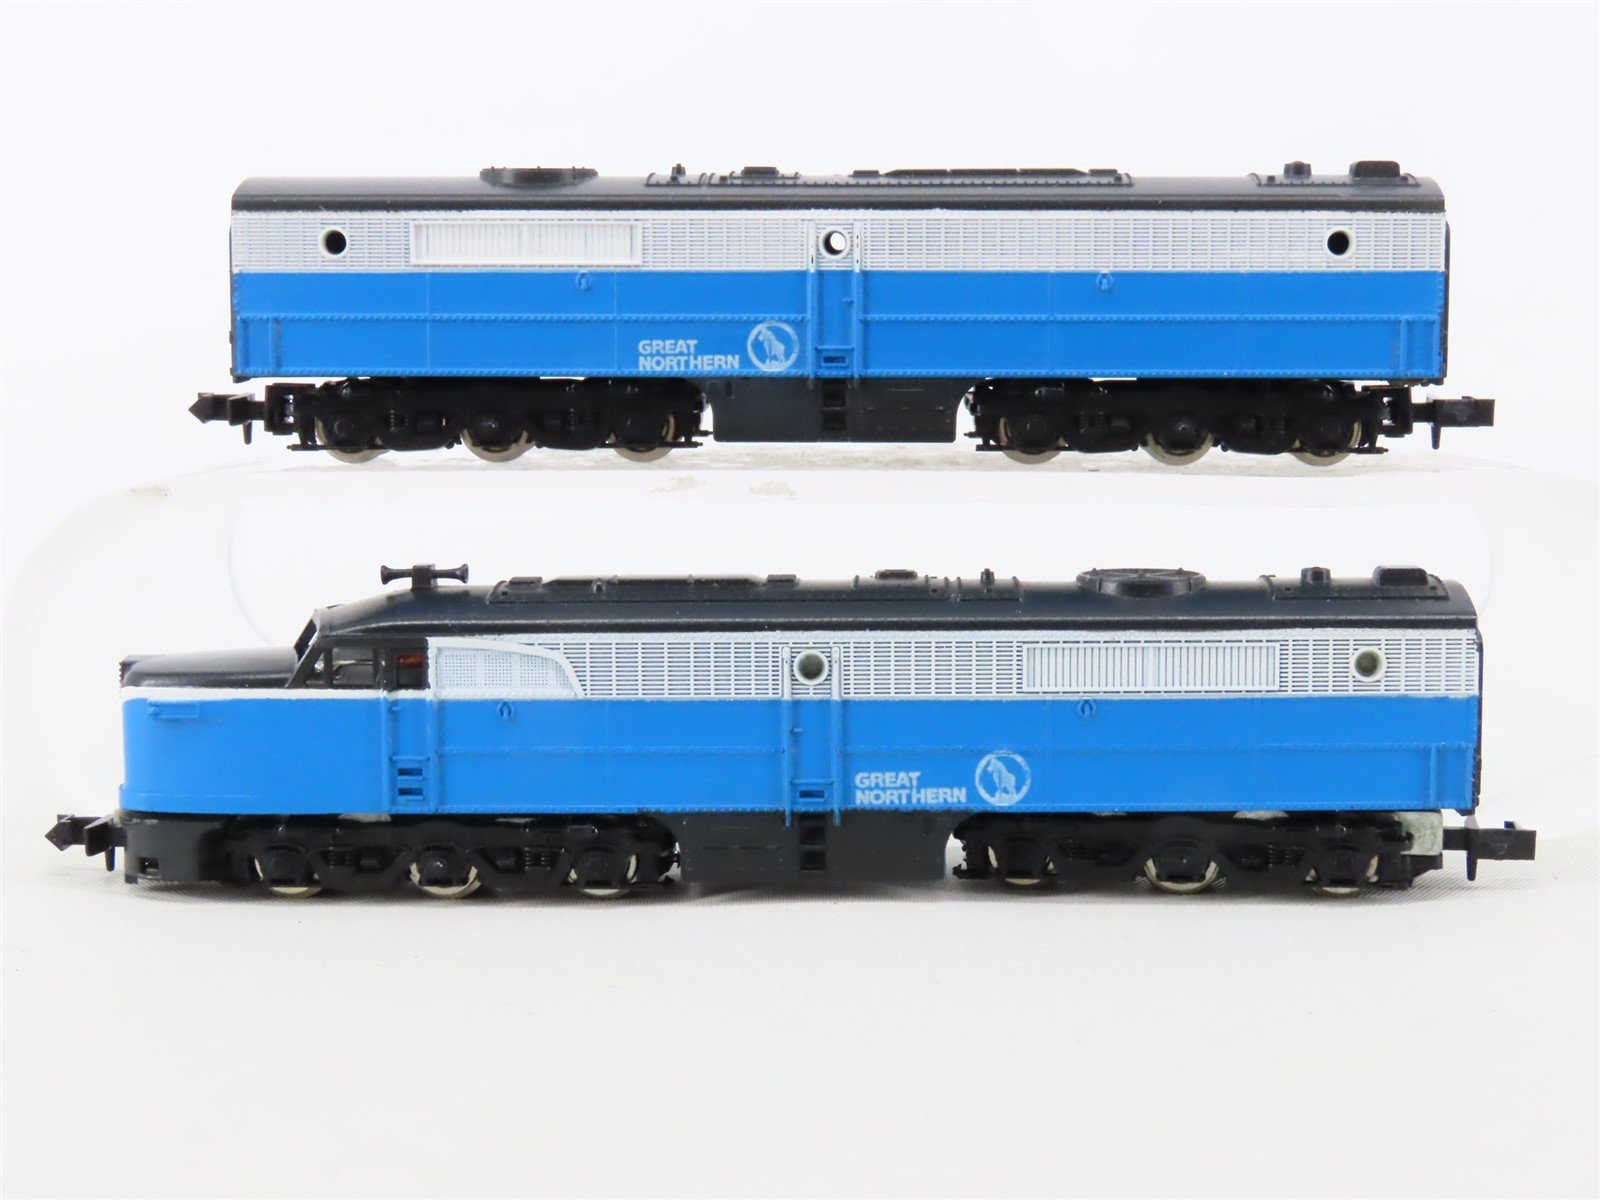 N Scale Con-Cor GN Great Northern "Big Sky Blue" ALCO PA-1/PB-1 Diesel Set No#